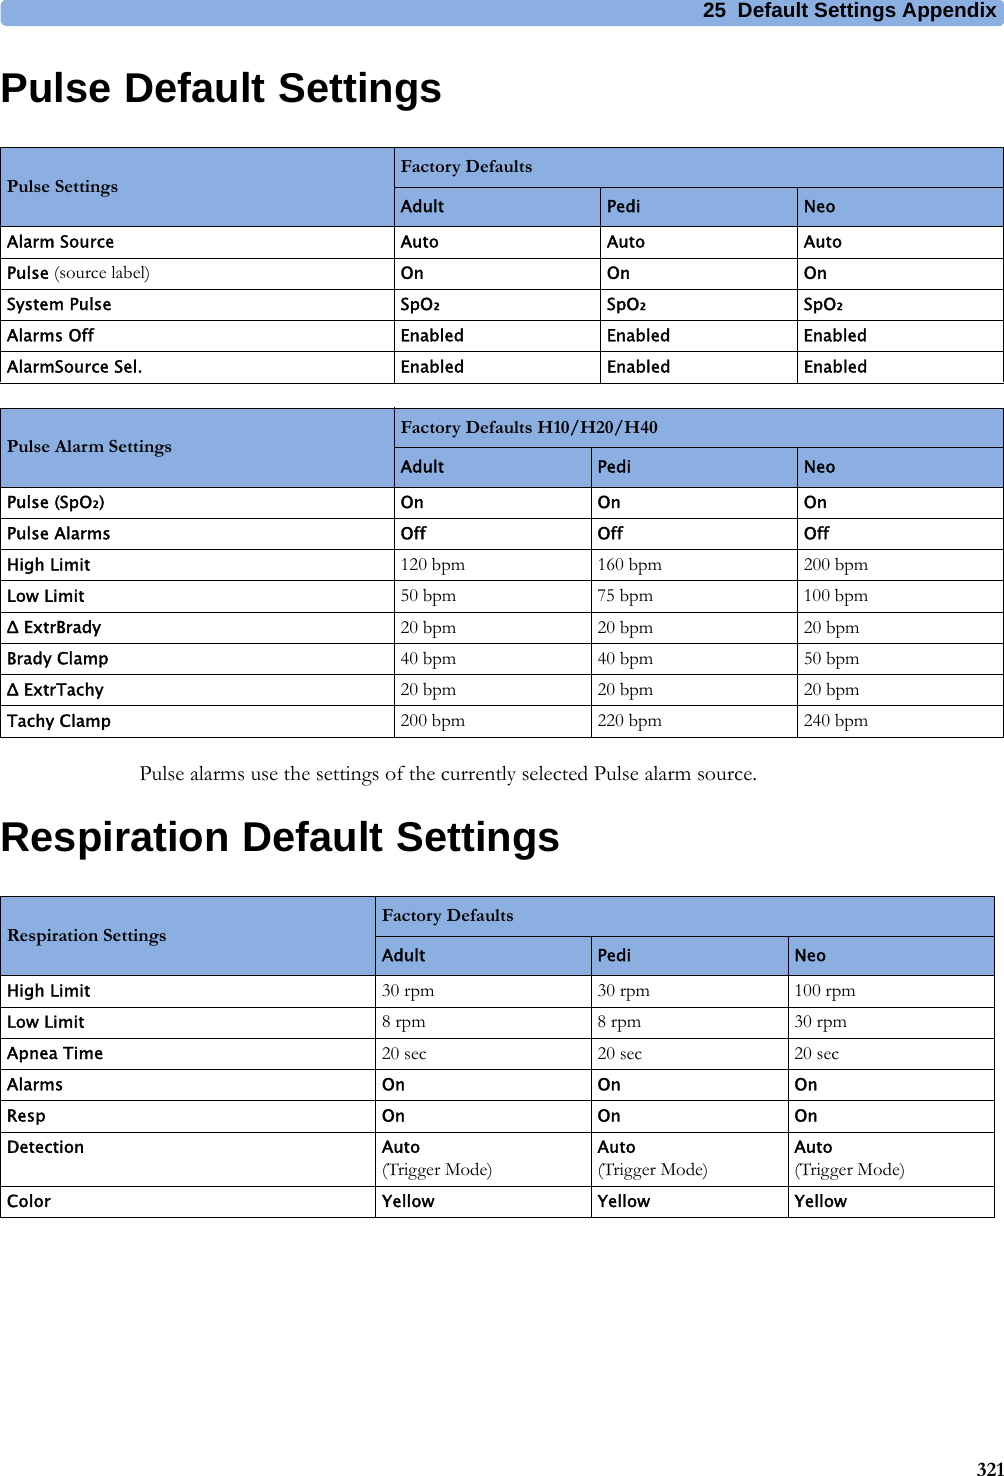 25 Default Settings Appendix321Pulse Default SettingsPulse alarms use the settings of the currently selected Pulse alarm source.Respiration Default SettingsPulse SettingsFactory DefaultsAdult Pedi NeoAlarm Source Auto Auto AutoPulse (source label) On On OnSystem Pulse SpO₂SpO₂SpO₂Alarms Off Enabled Enabled EnabledAlarmSource Sel. Enabled Enabled EnabledPulse Alarm SettingsFactory Defaults H10/H20/H40Adult Pedi NeoPulse (SpO₂)OnOnOnPulse Alarms Off Off OffHigh Limit 120 bpm 160 bpm 200 bpmLow Limit 50 bpm 75 bpm 100 bpmΔ ExtrBrady 20 bpm 20 bpm 20 bpmBrady Clamp 40 bpm 40 bpm 50 bpmΔ ExtrTachy 20 bpm 20 bpm 20 bpmTachy Clamp 200 bpm 220 bpm 240 bpmRespiration SettingsFactory Defaults Adult Pedi NeoHigh Limit 30 rpm 30 rpm 100 rpmLow Limit 8 rpm 8 rpm 30 rpmApnea Time 20 sec 20 sec 20 secAlarms On On OnResp On On OnDetection Auto(Trigger Mode)Auto(Trigger Mode)Auto(Trigger Mode)Color Yellow Yellow Yellow